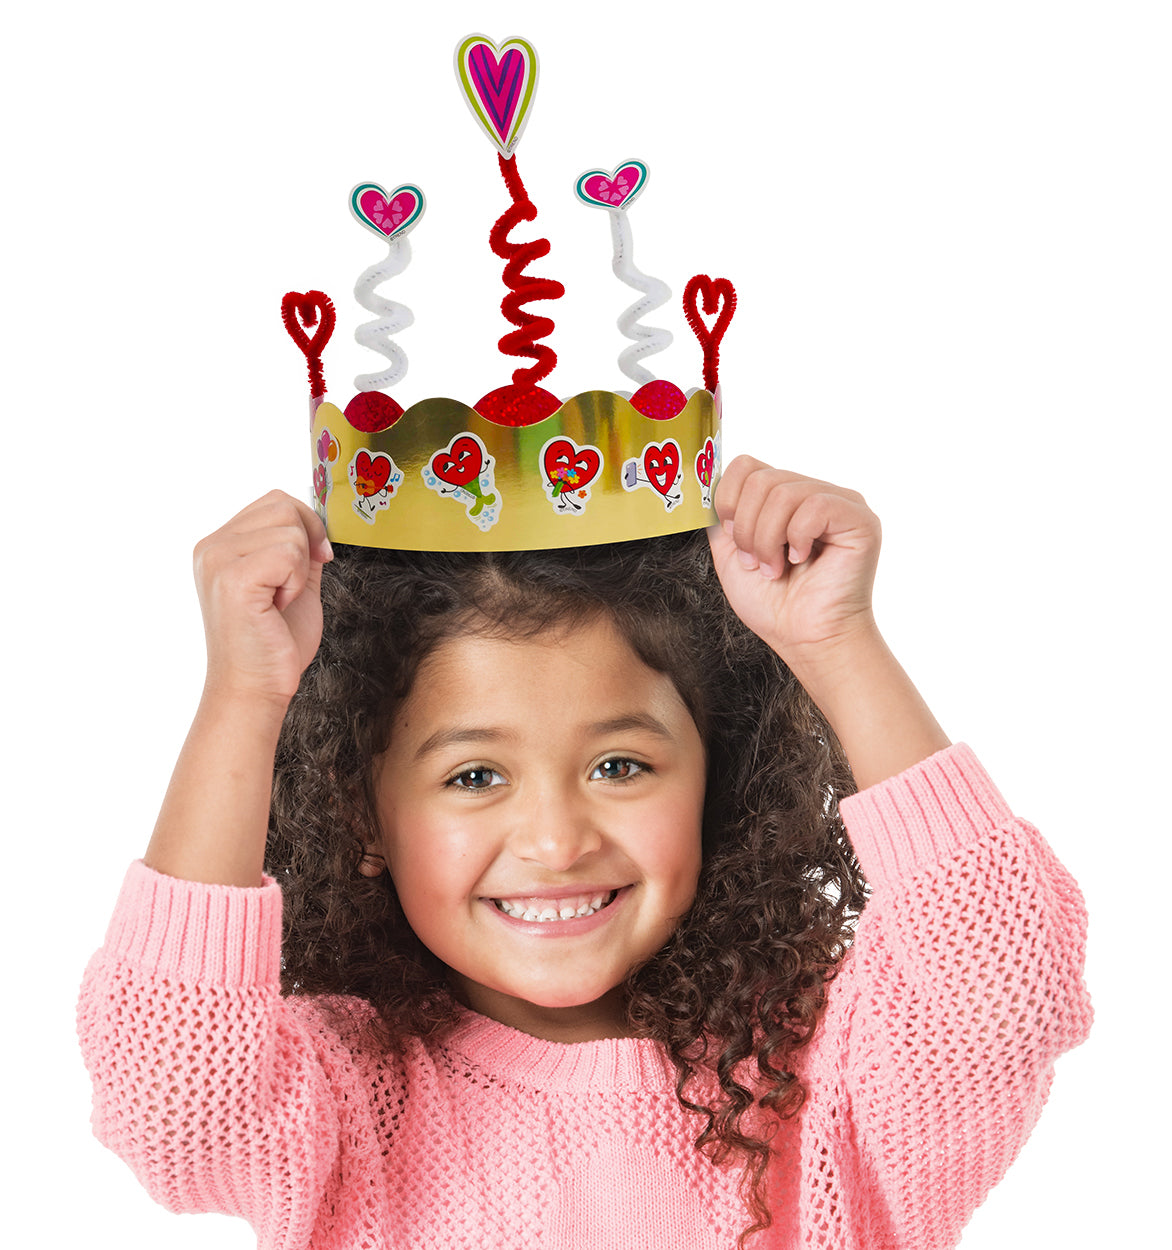 How to make a Valentine's Day paper crown easy kid project scratch 'n sniff stickers